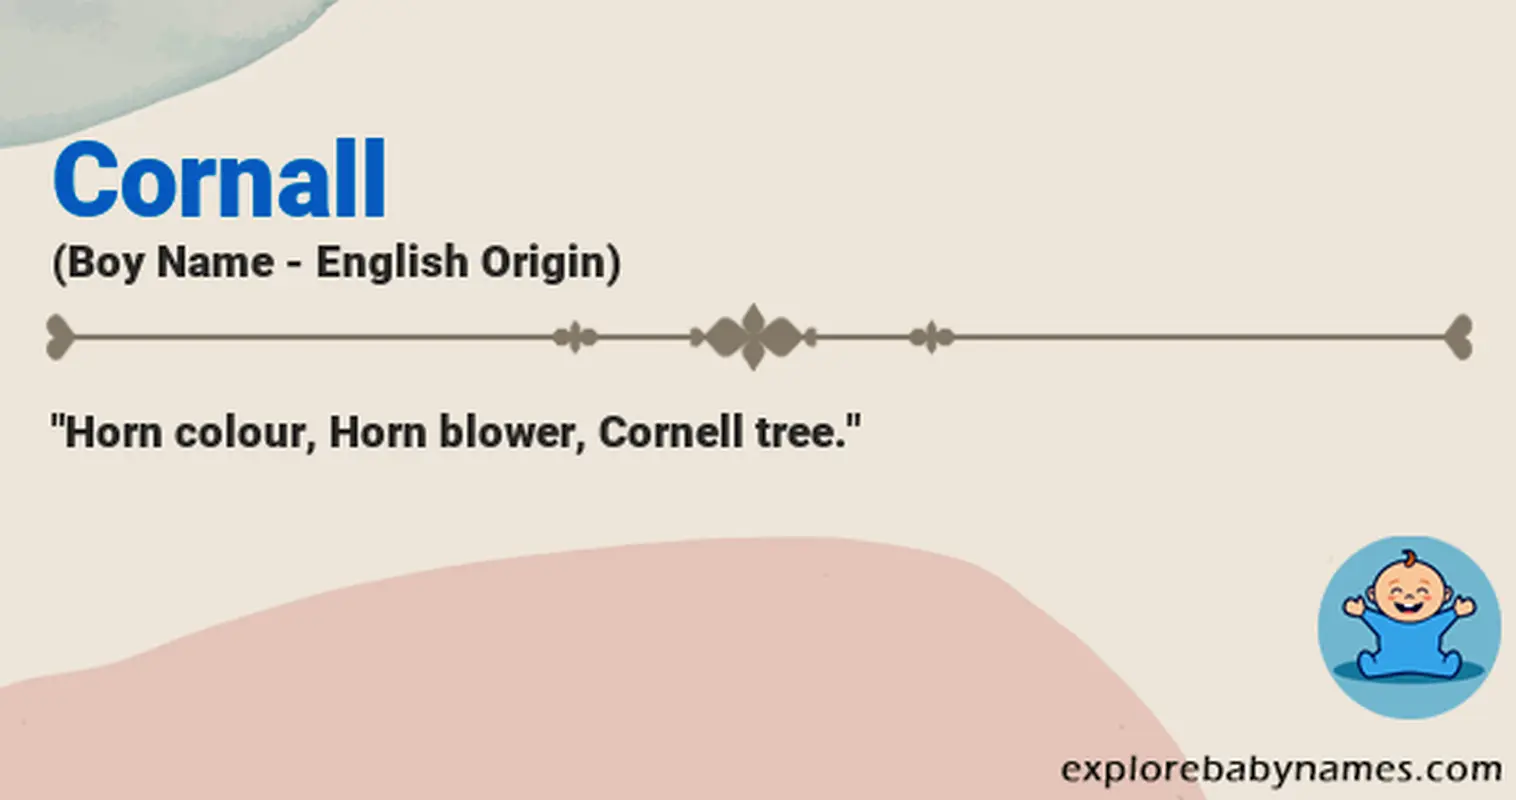 Meaning of Cornall